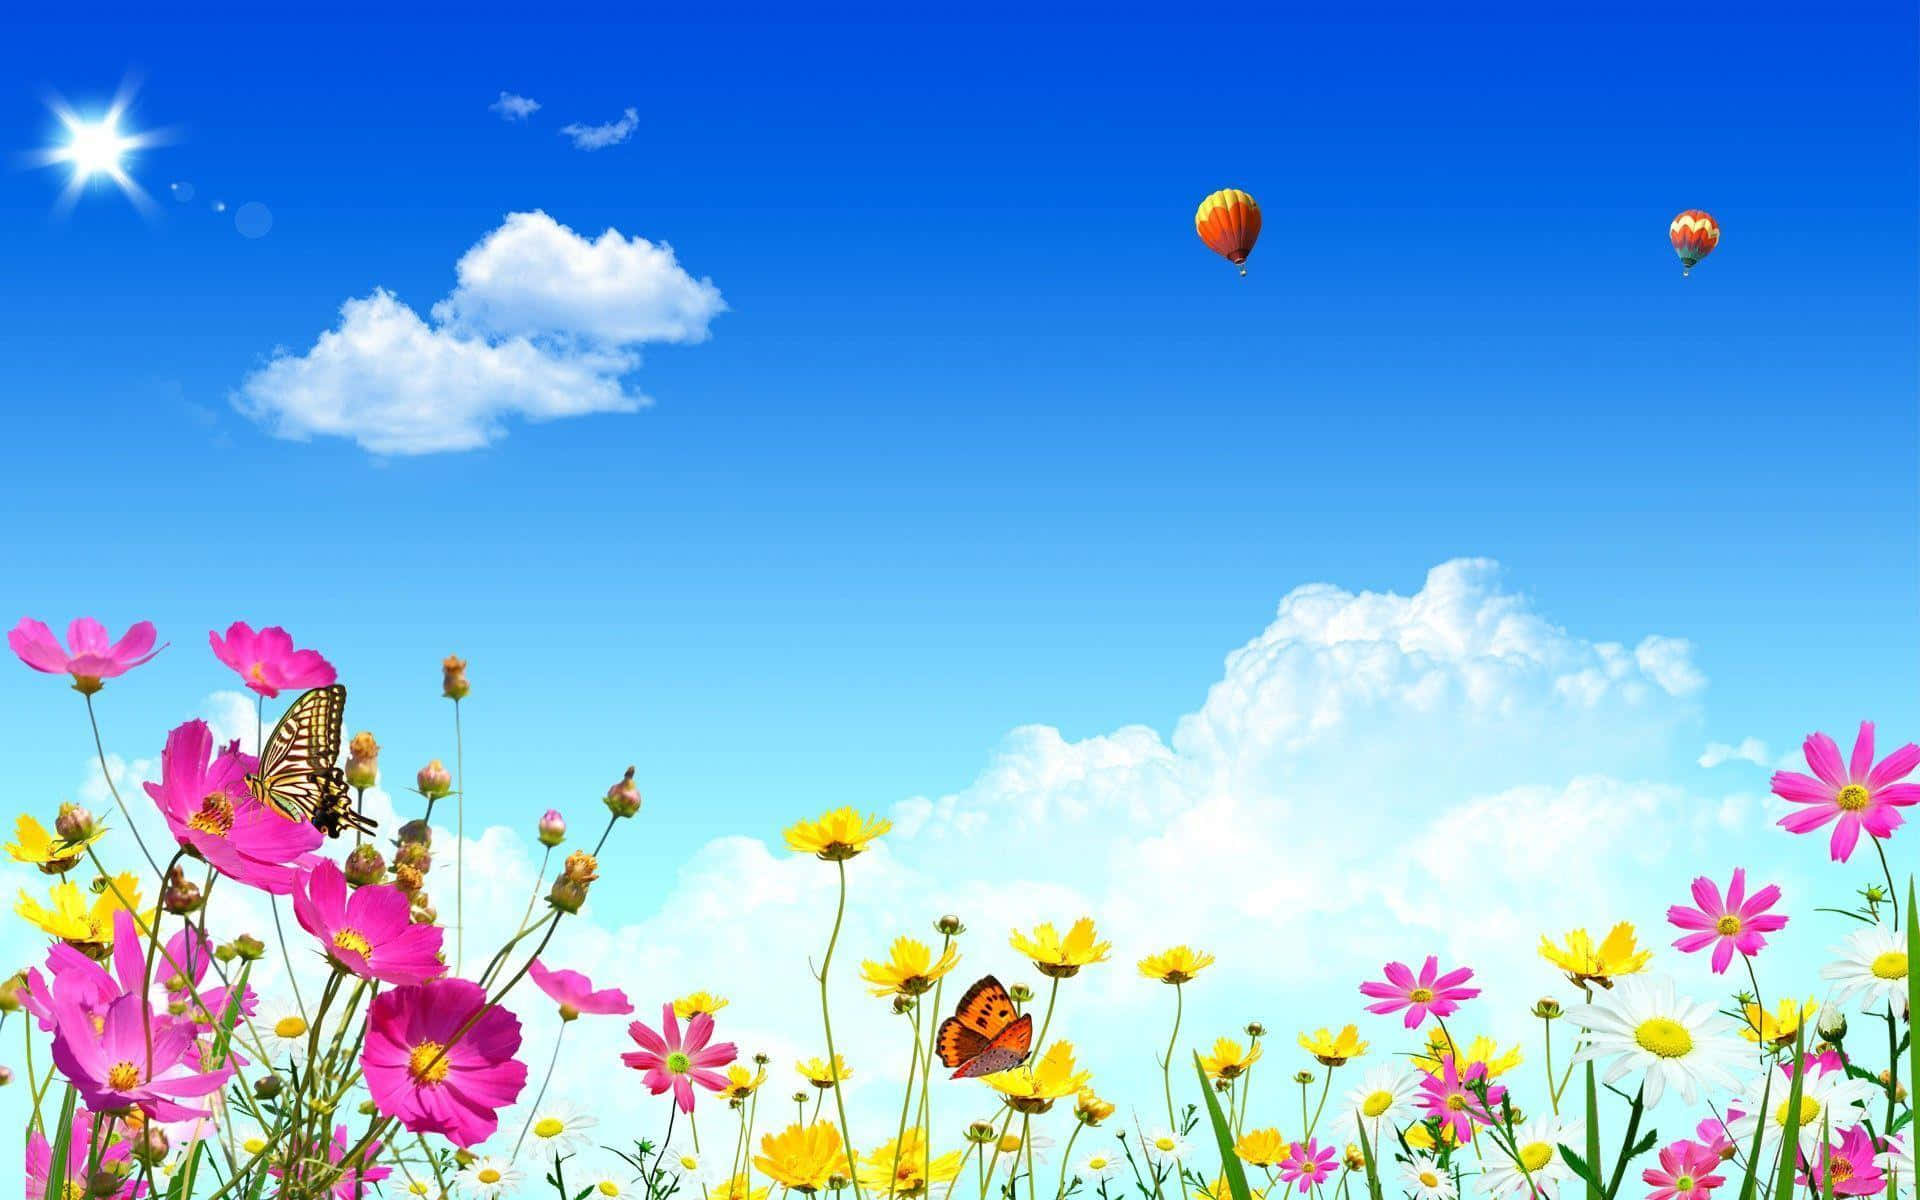 Flower Field Screen Saver Picture